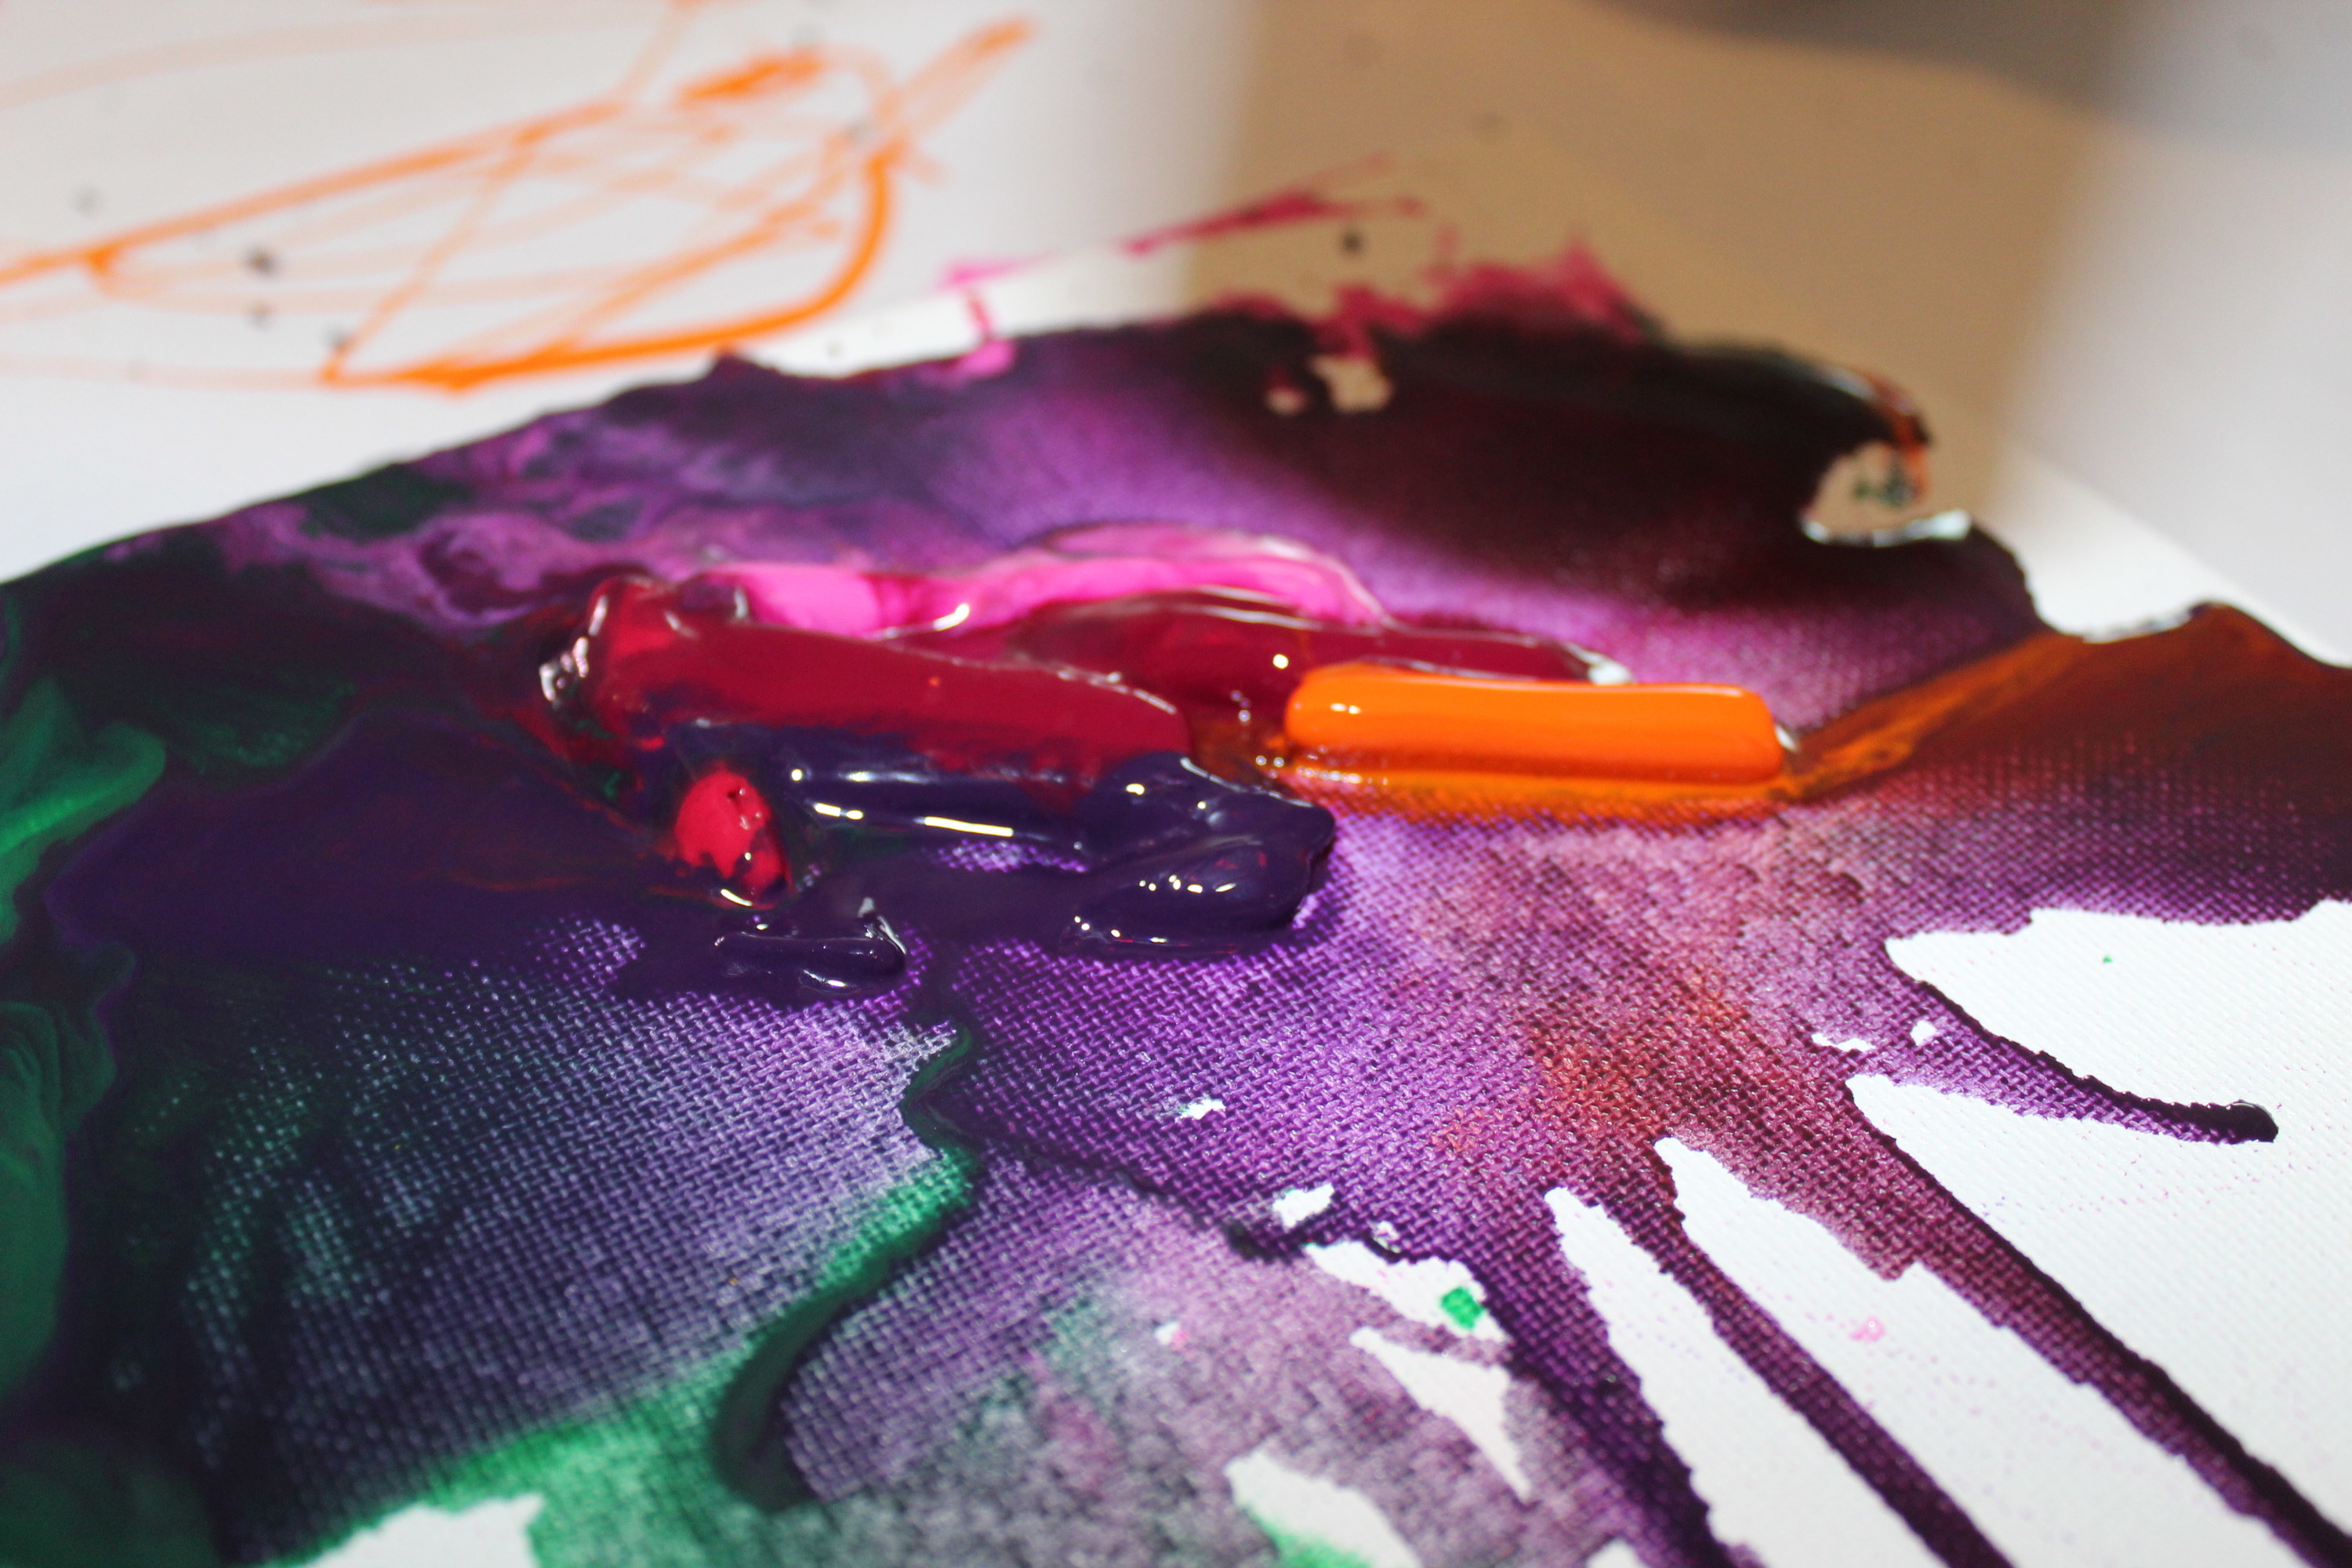 melting crayons on canvas